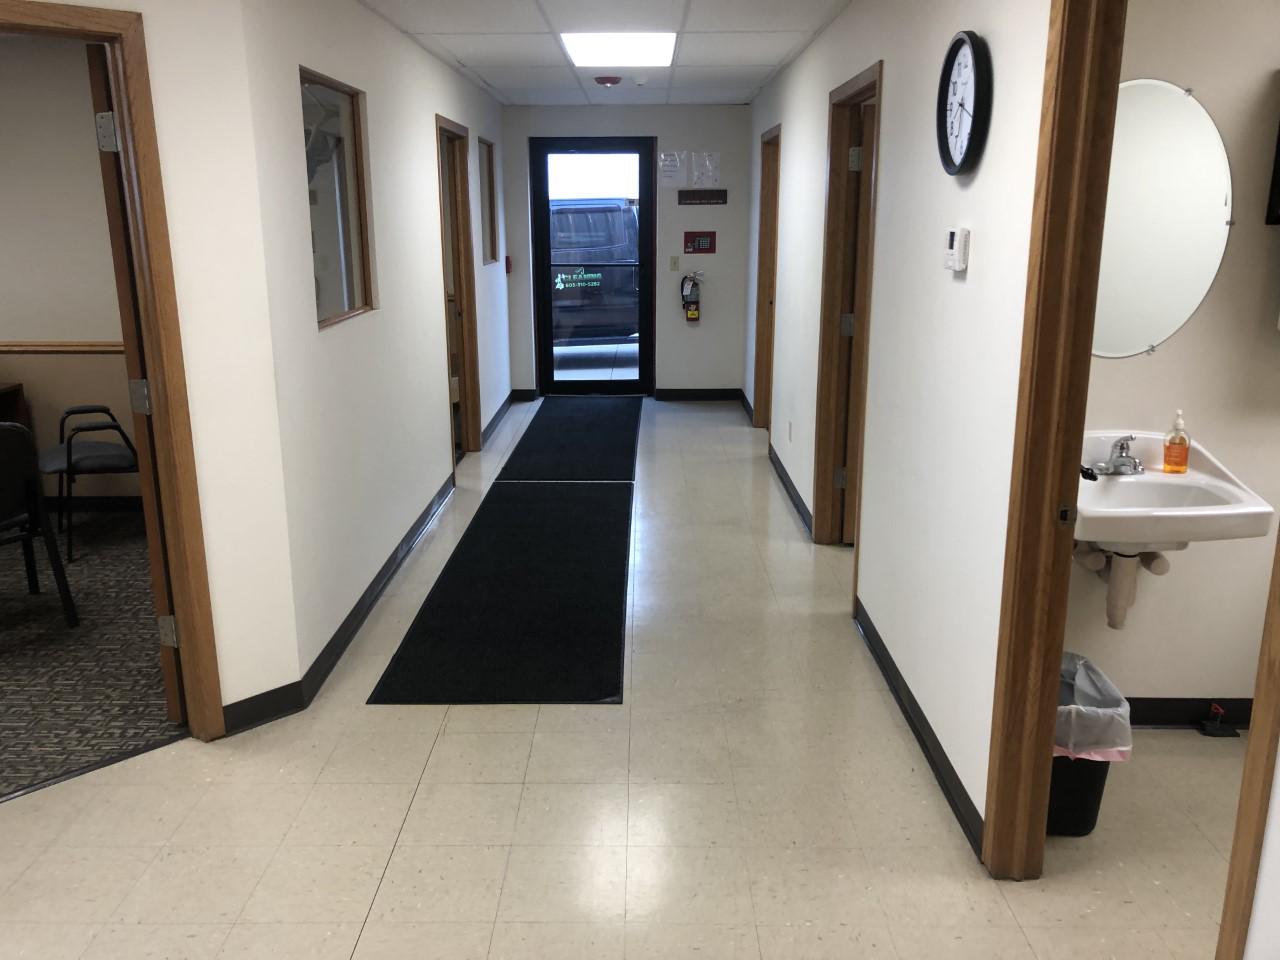 Commercial and Janitorial Cleaning